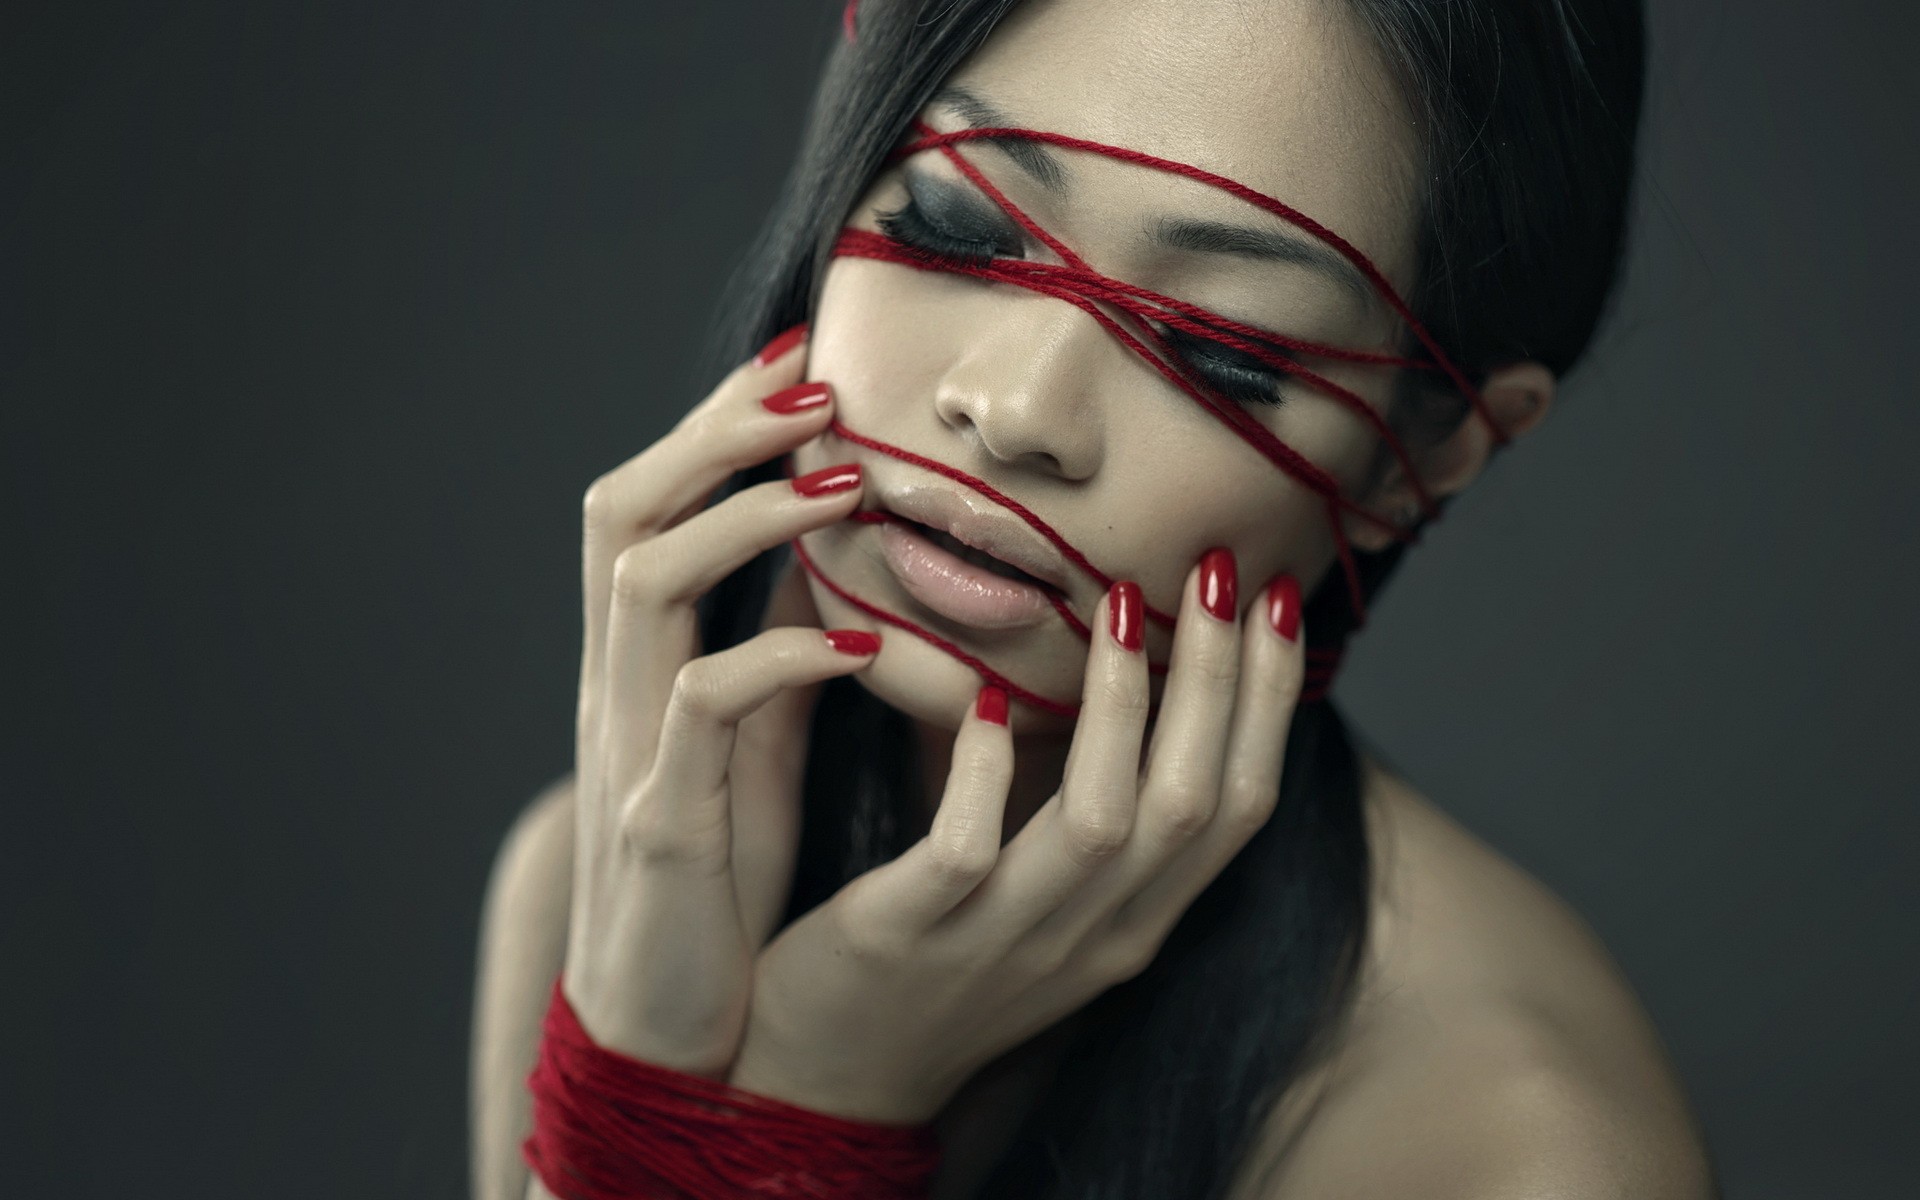 People 1920x1200 women dark hair closed eyes juicy lips hand on face face closeup women indoors model indoors studio Asian makeup red nails painted nails